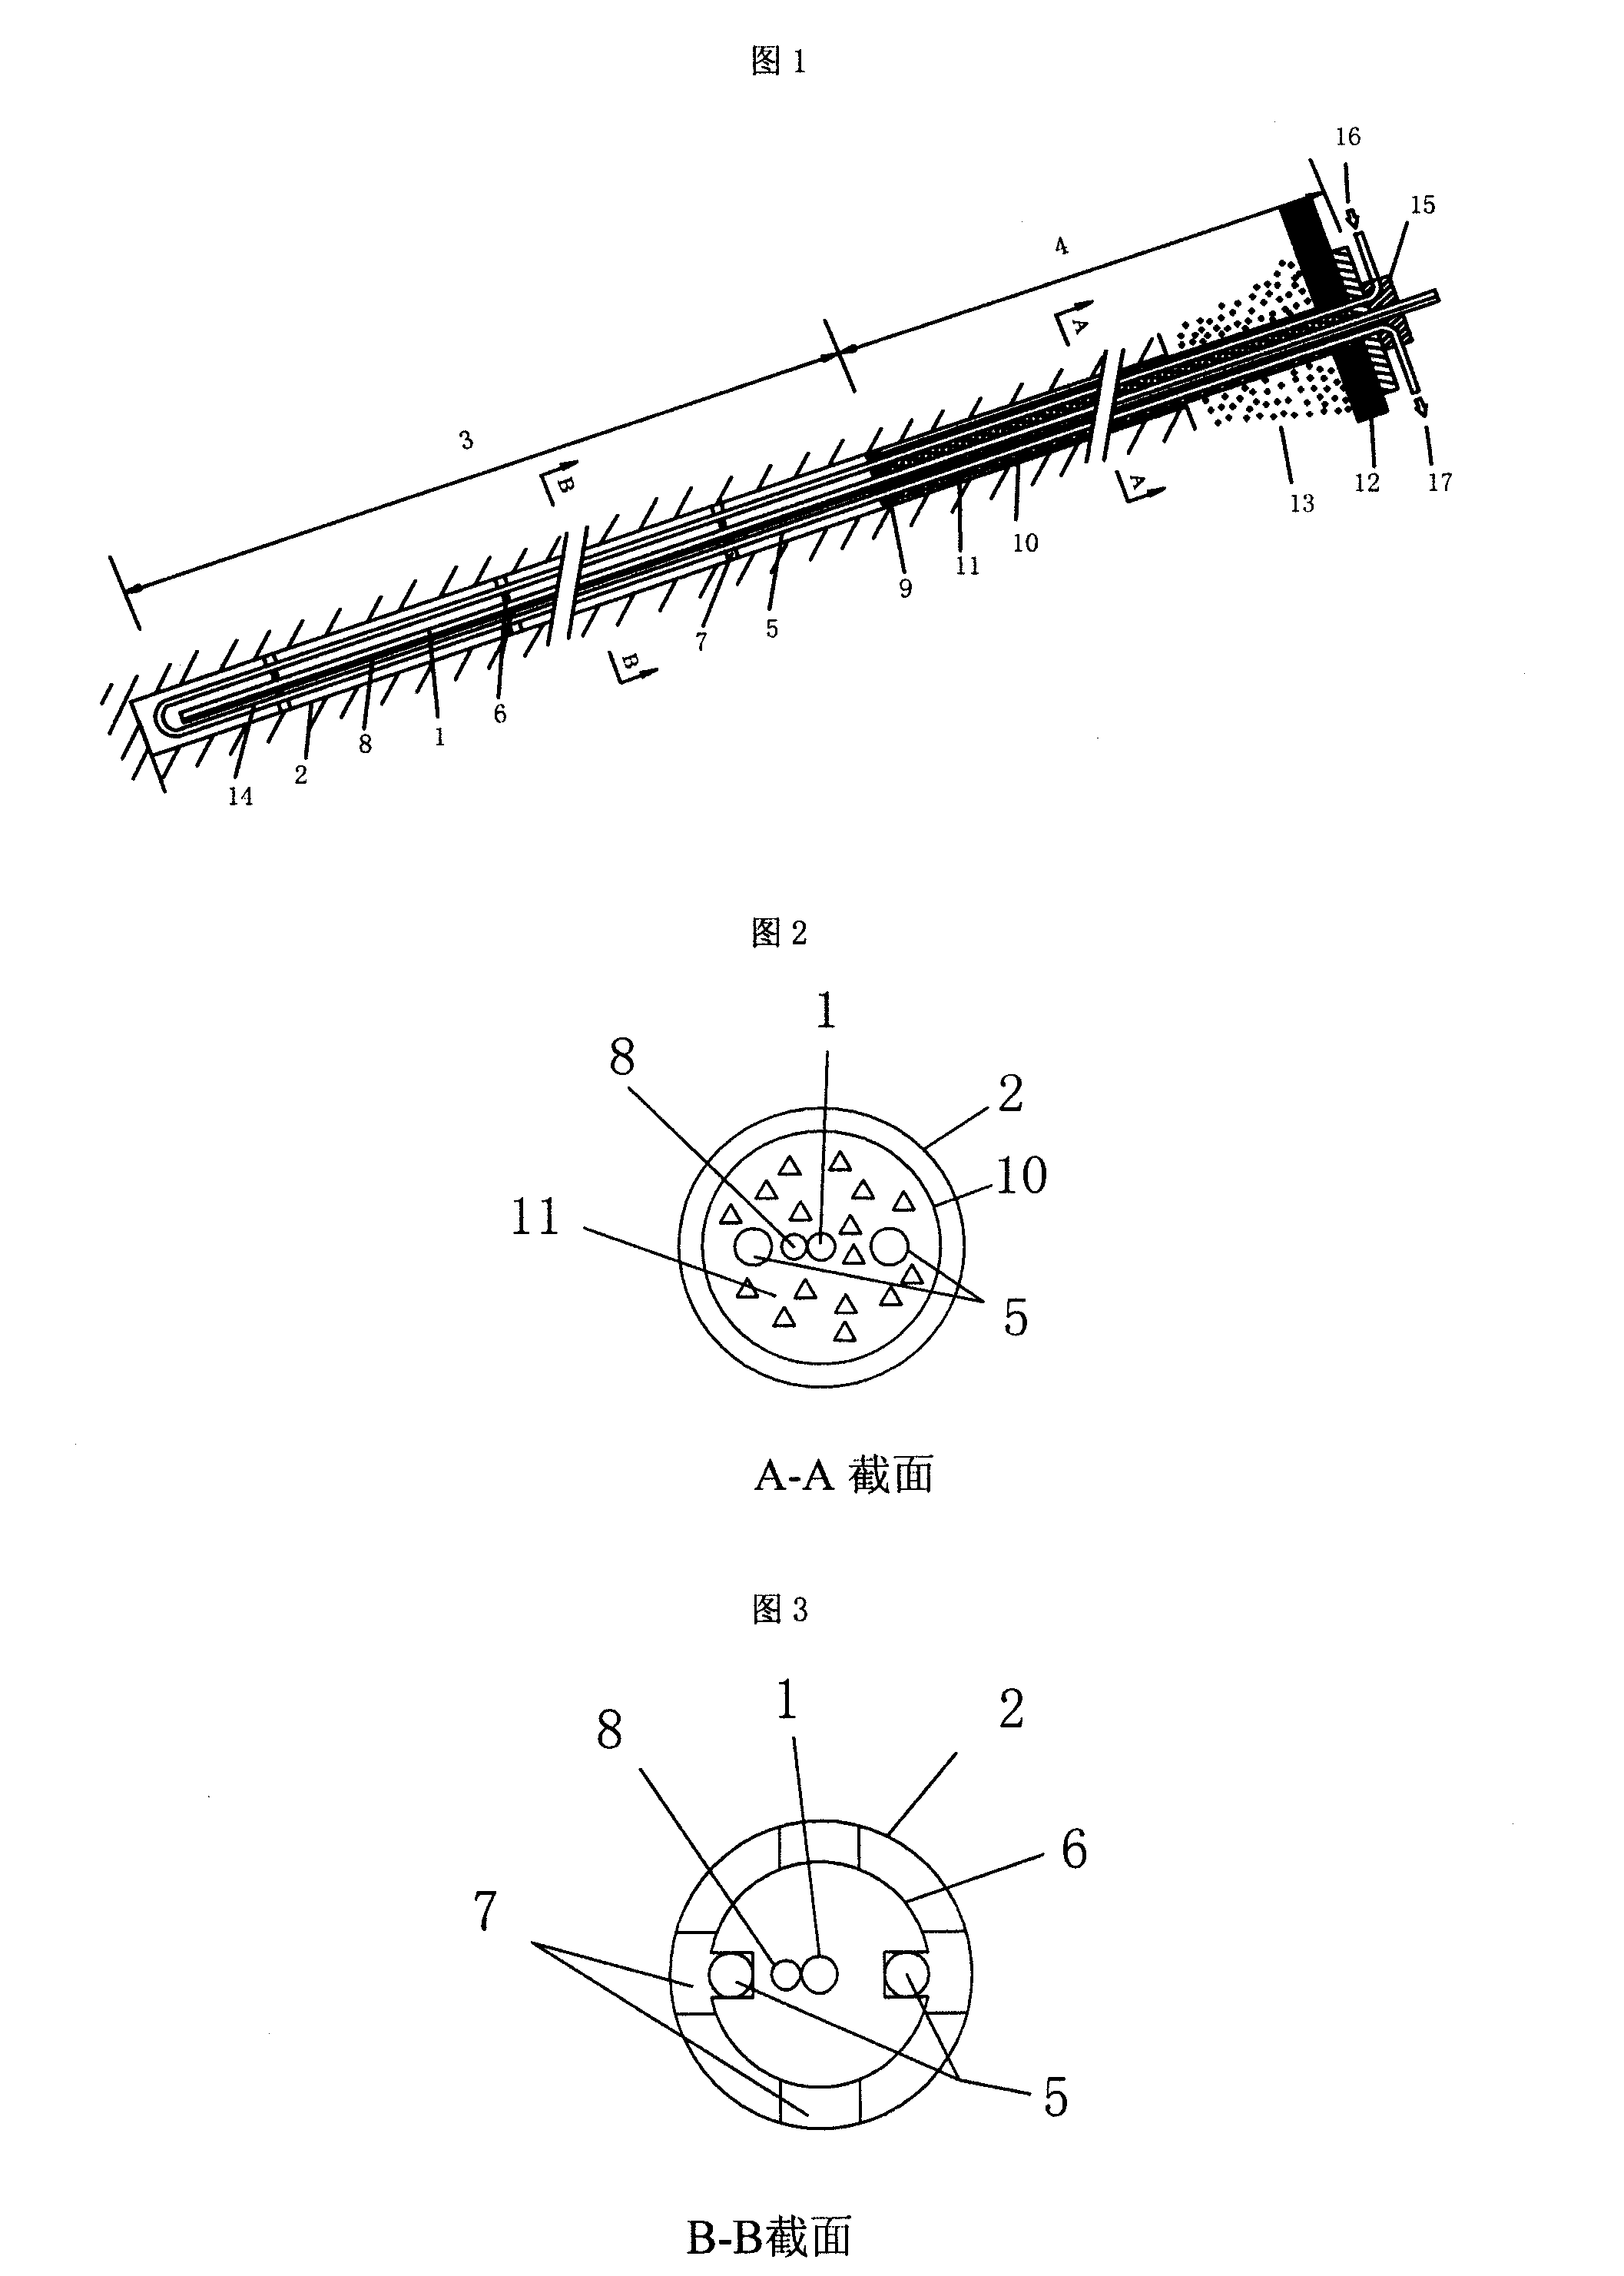 Shallow layer geothermal energy converting anchor rod